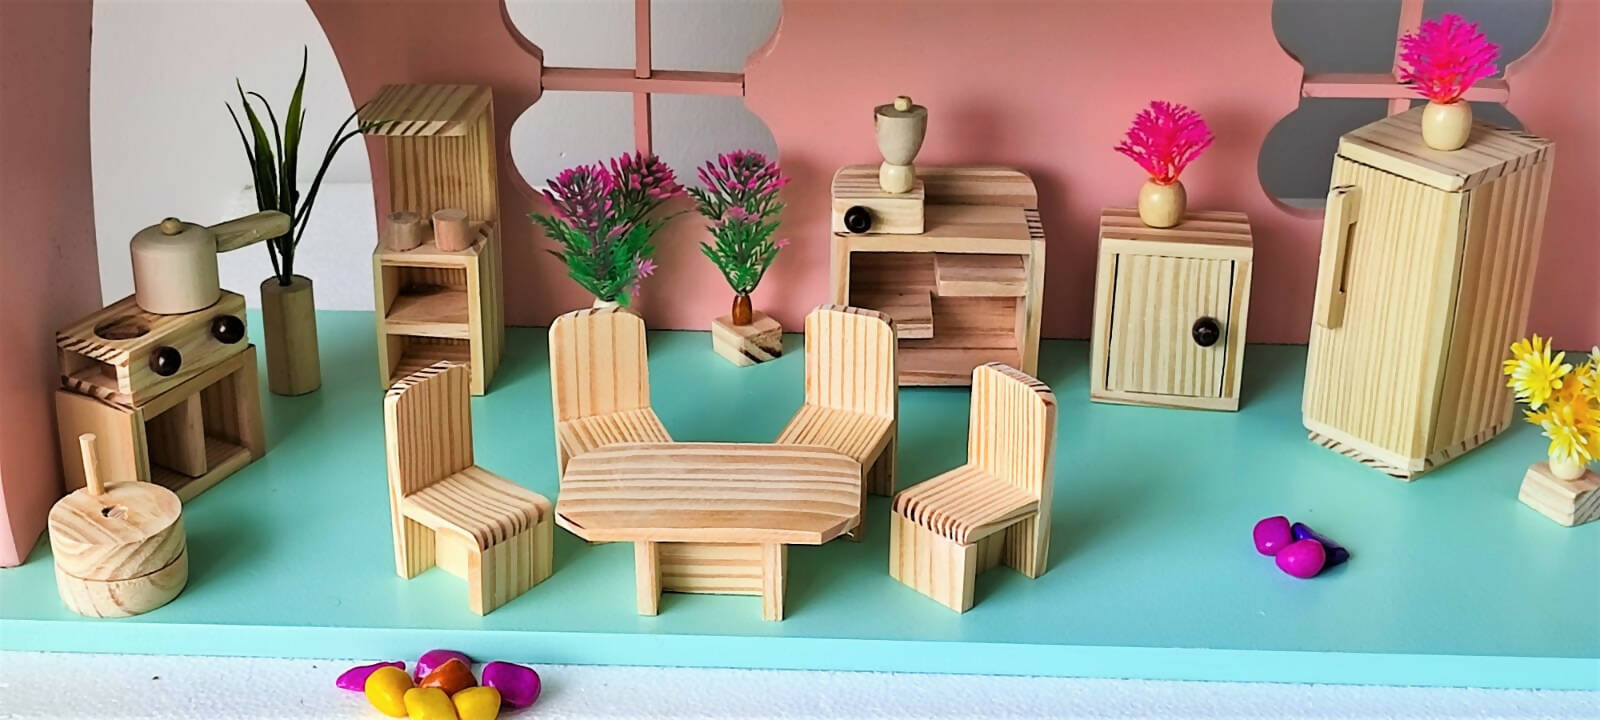 Wooden Extended Kitchen Toy - PyaraBaby